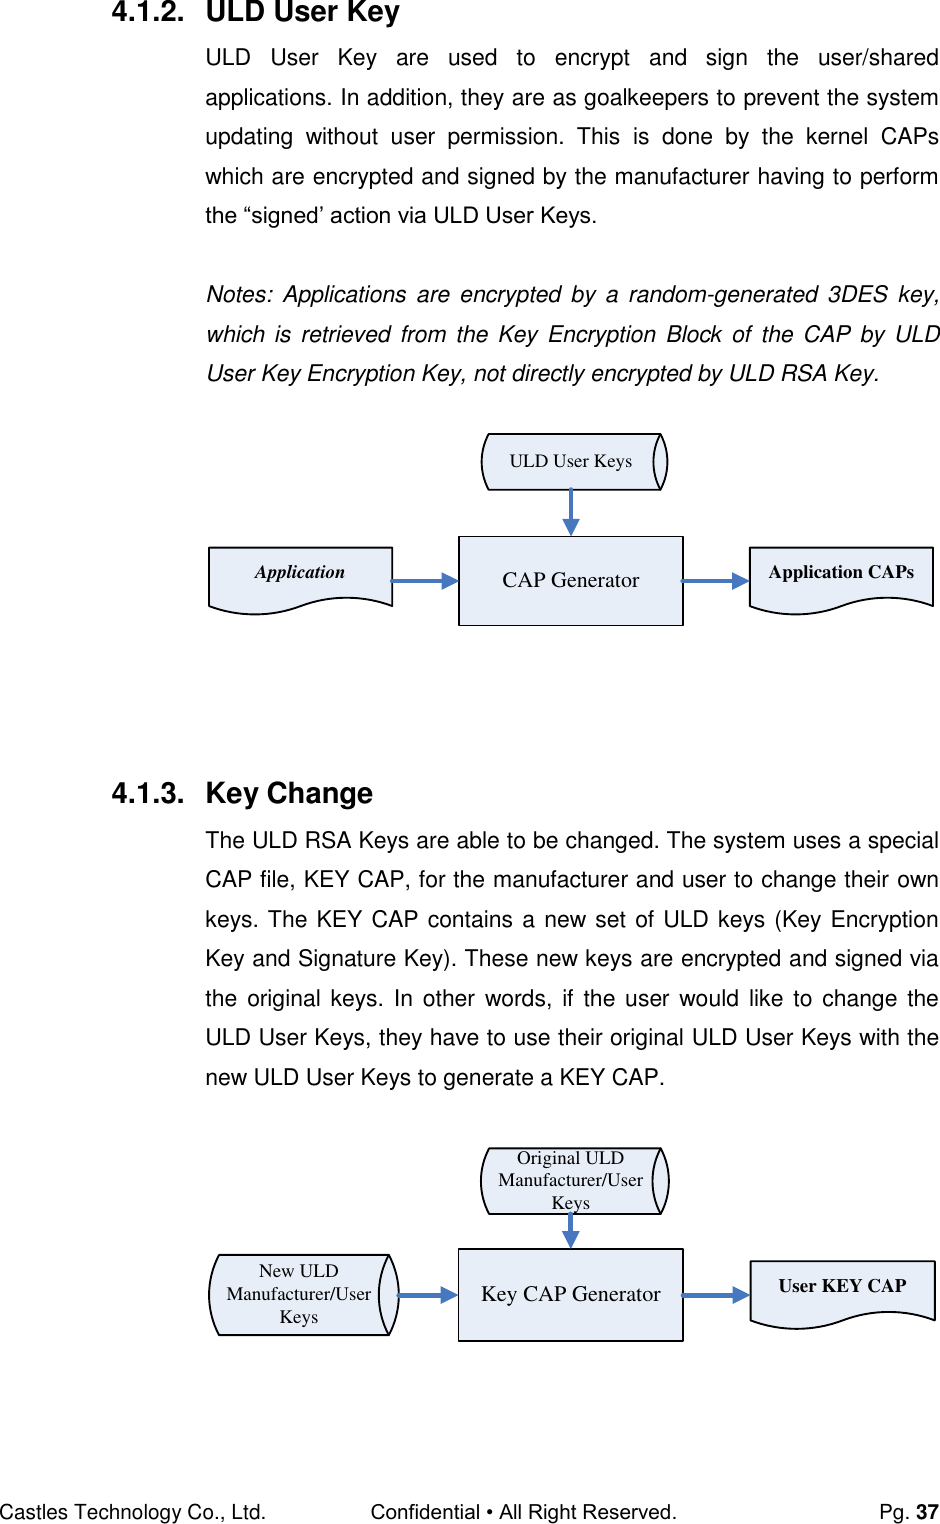 Castles Technology Co., Ltd. Confidential • All Right Reserved.  Pg. 37 4.1.2.  ULD User Key ULD  User  Key  are  used  to  encrypt  and  sign  the  user/shared applications. In addition, they are as goalkeepers to prevent the system updating  without  user  permission.  This  is  done  by  the  kernel  CAPs which are encrypted and signed by the manufacturer having to perform the “signed’ action via ULD User Keys.  Notes:  Applications  are encrypted  by  a random-generated  3DES  key, which is  retrieved  from  the  Key  Encryption  Block  of  the CAP by  ULD User Key Encryption Key, not directly encrypted by ULD RSA Key.  Application Application CAPsULD User KeysCAP Generator     4.1.3.  Key Change The ULD RSA Keys are able to be changed. The system uses a special CAP file, KEY CAP, for the manufacturer and user to change their own keys. The KEY CAP contains a new set of ULD keys (Key Encryption Key and Signature Key). These new keys are encrypted and signed via the  original keys. In other  words, if the  user  would  like  to  change  the ULD User Keys, they have to use their original ULD User Keys with the new ULD User Keys to generate a KEY CAP.  Key CAP GeneratorOriginal ULD Manufacturer/User KeysNew ULD Manufacturer/User KeysUser KEY CAP   